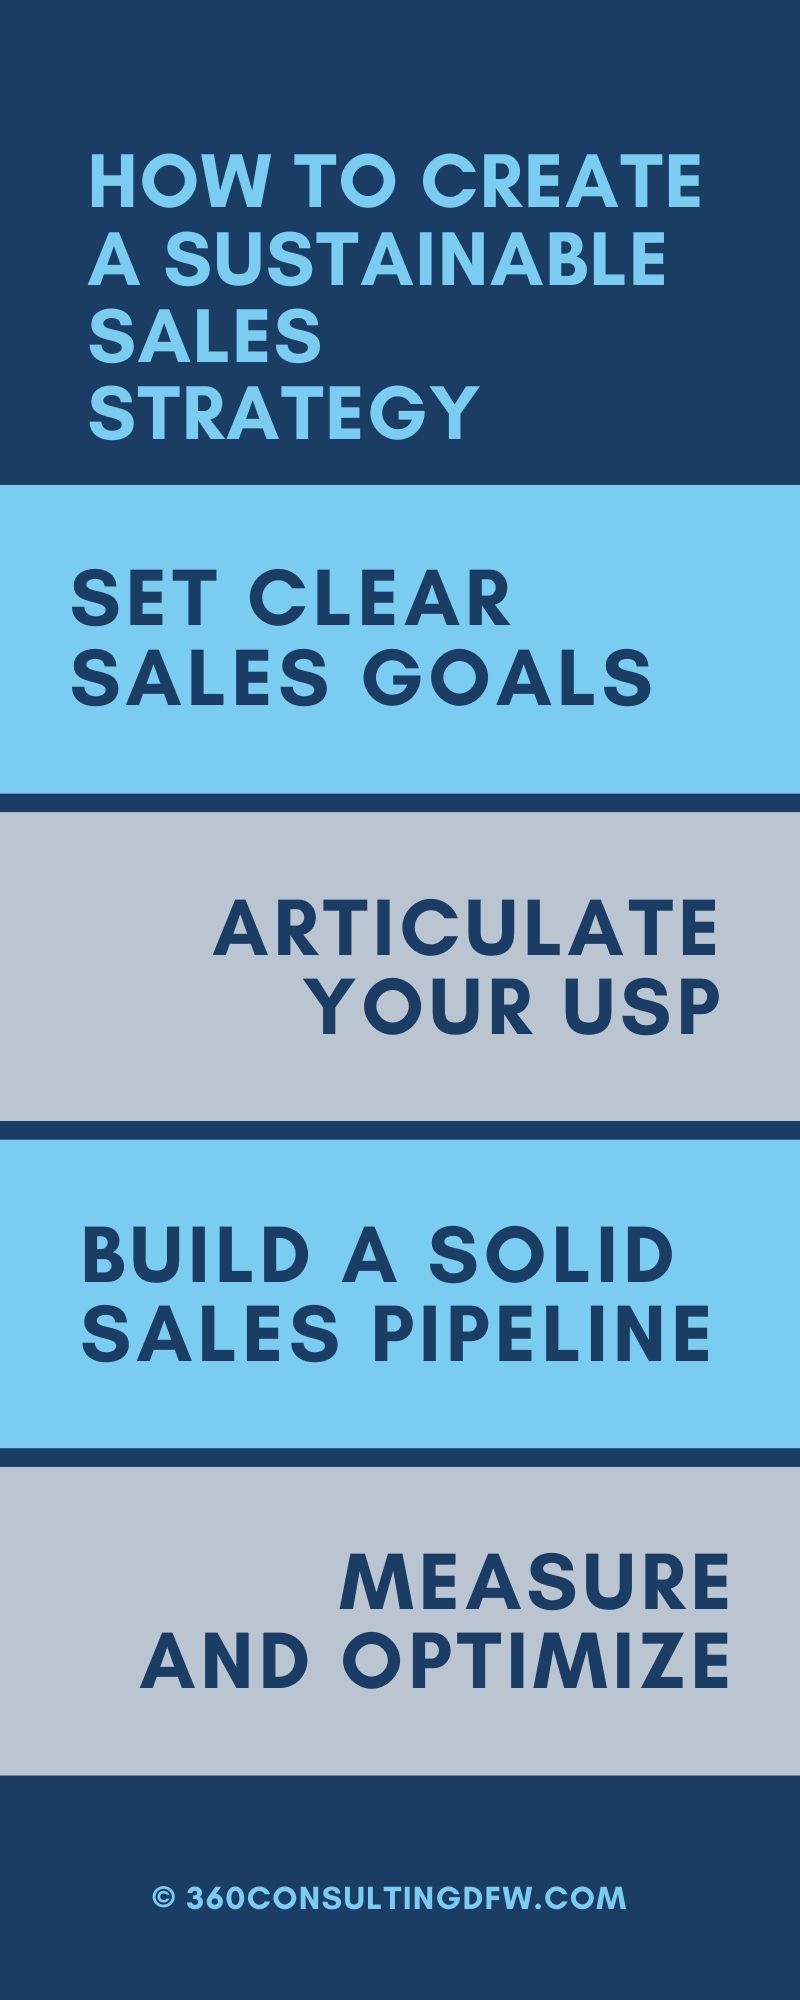 infographic summarizing the four points of building a sustainable sales strategy